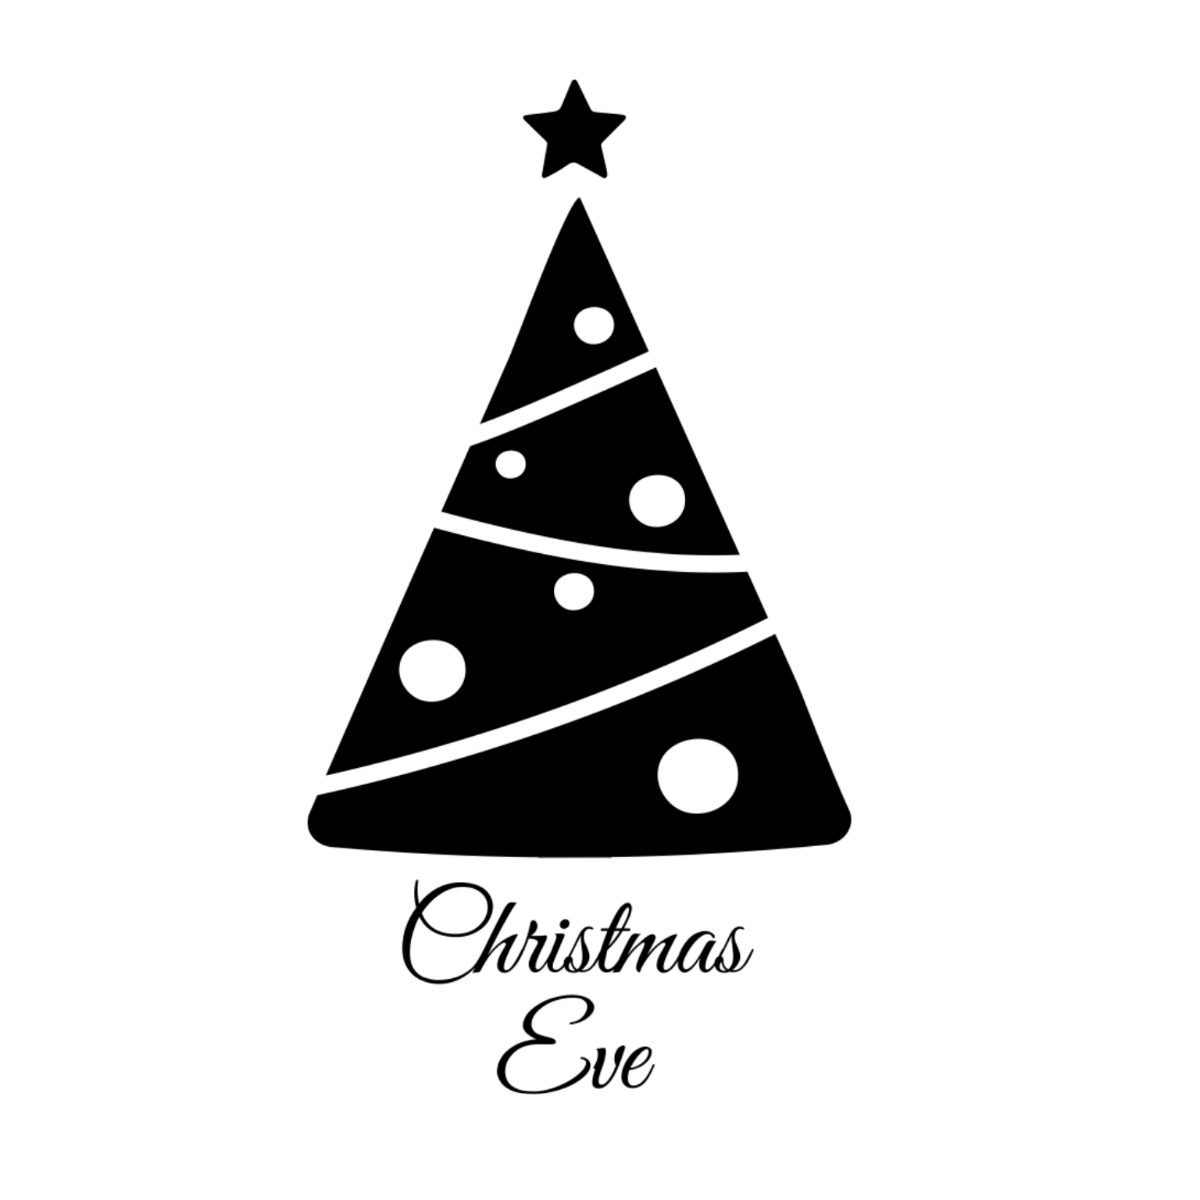 Christmas Eve Clipart Black and White